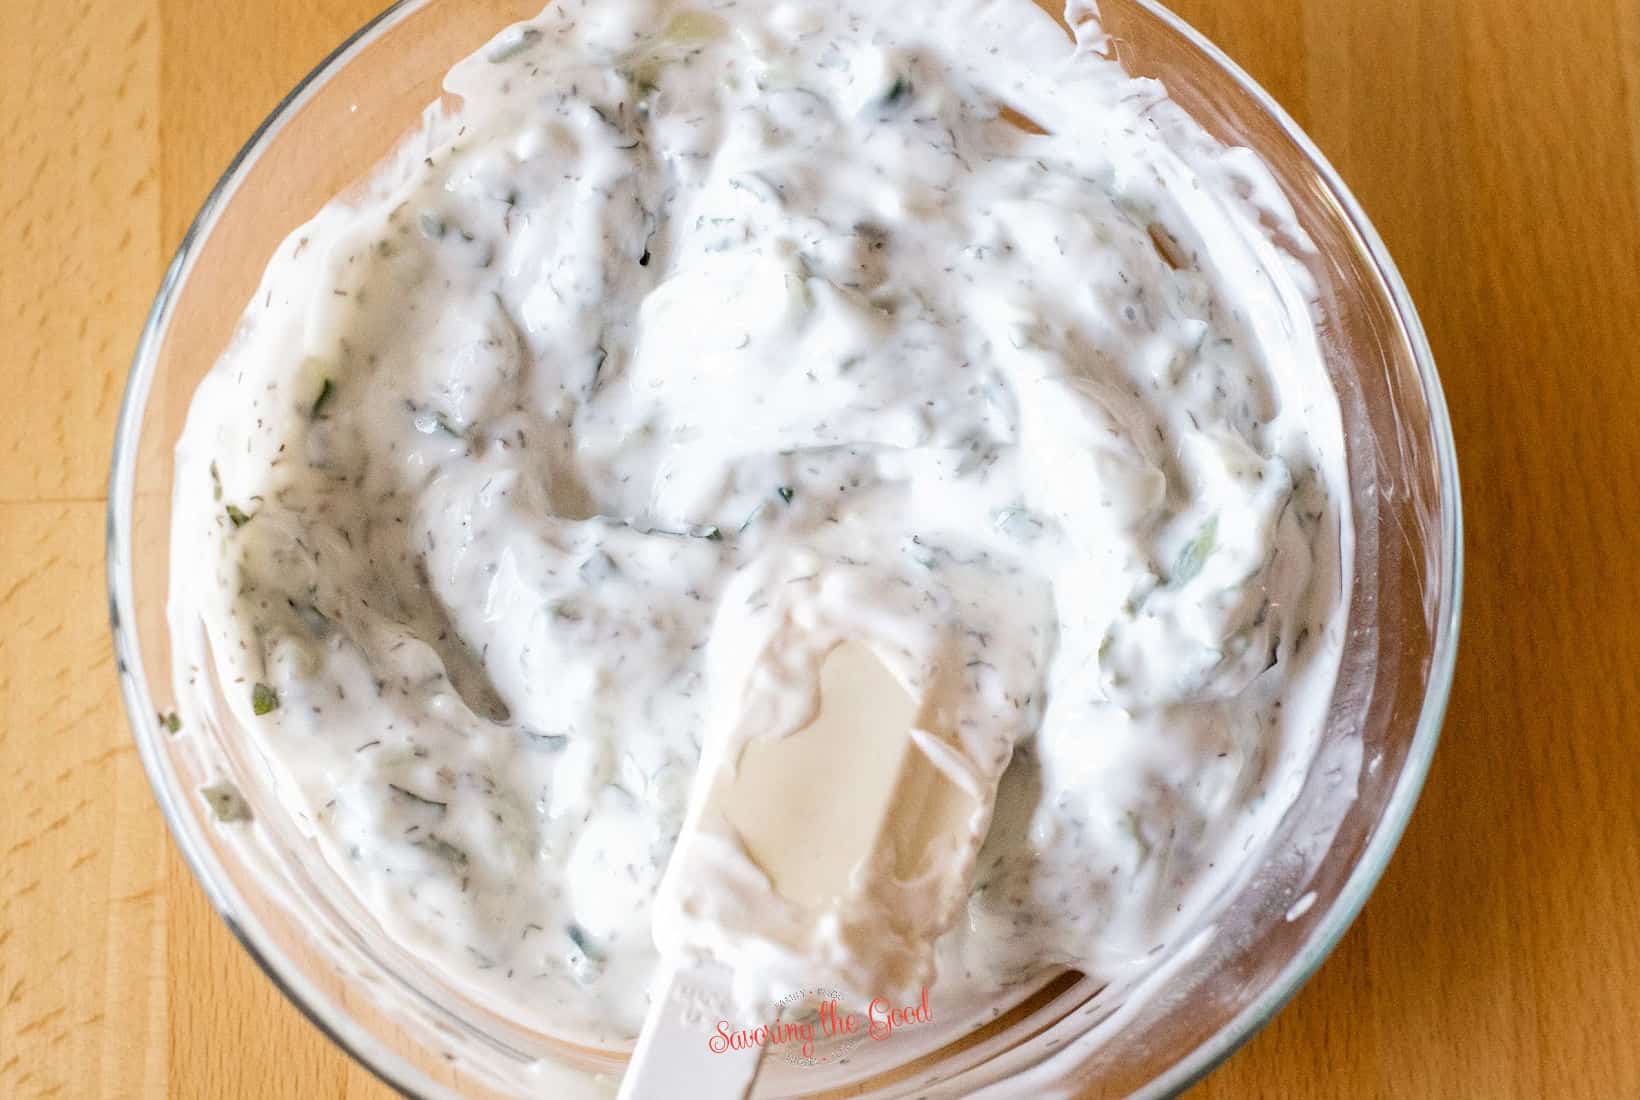 tzatziki sauce in a clear glass bowl, with white spatula stiring it.